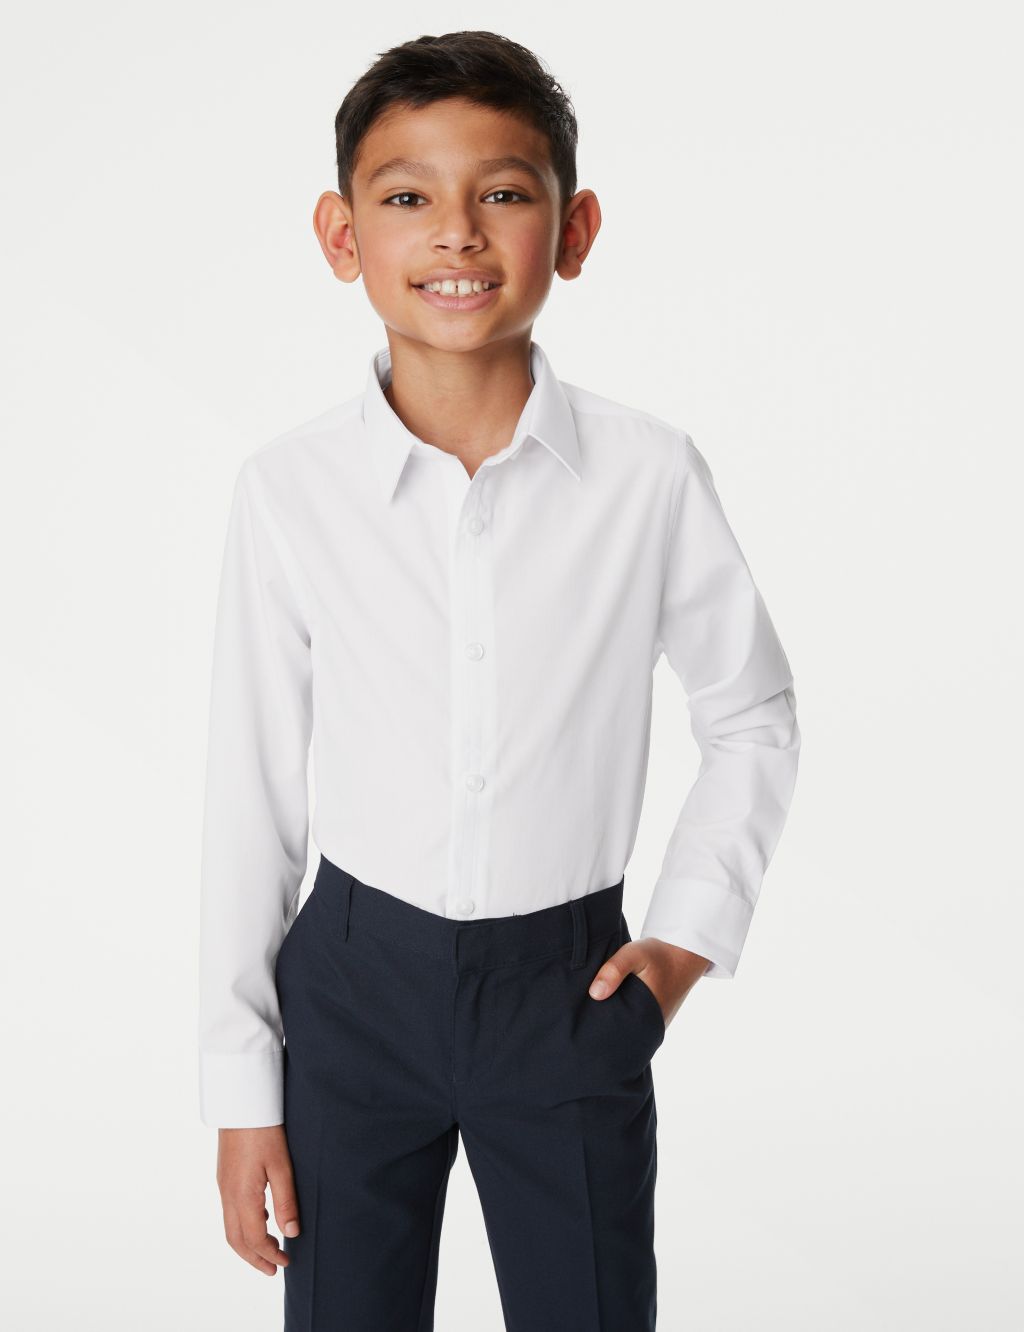 Adaptive Clothing for Kids | Assisted Dressing | M&S